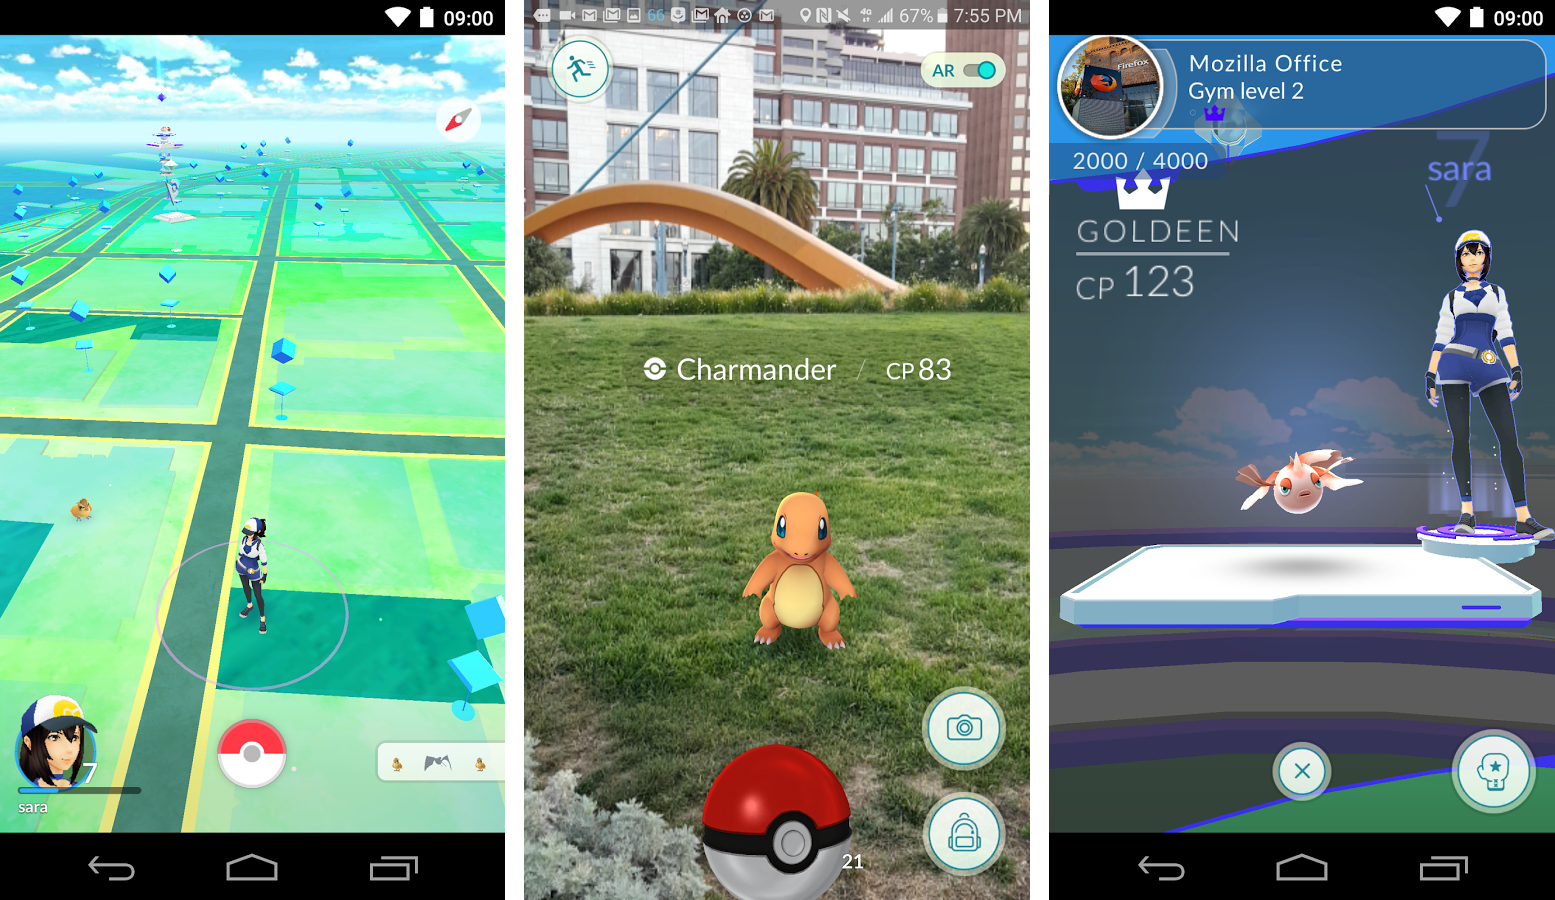 Pokémon Go Begins Rollout on Android and iOS